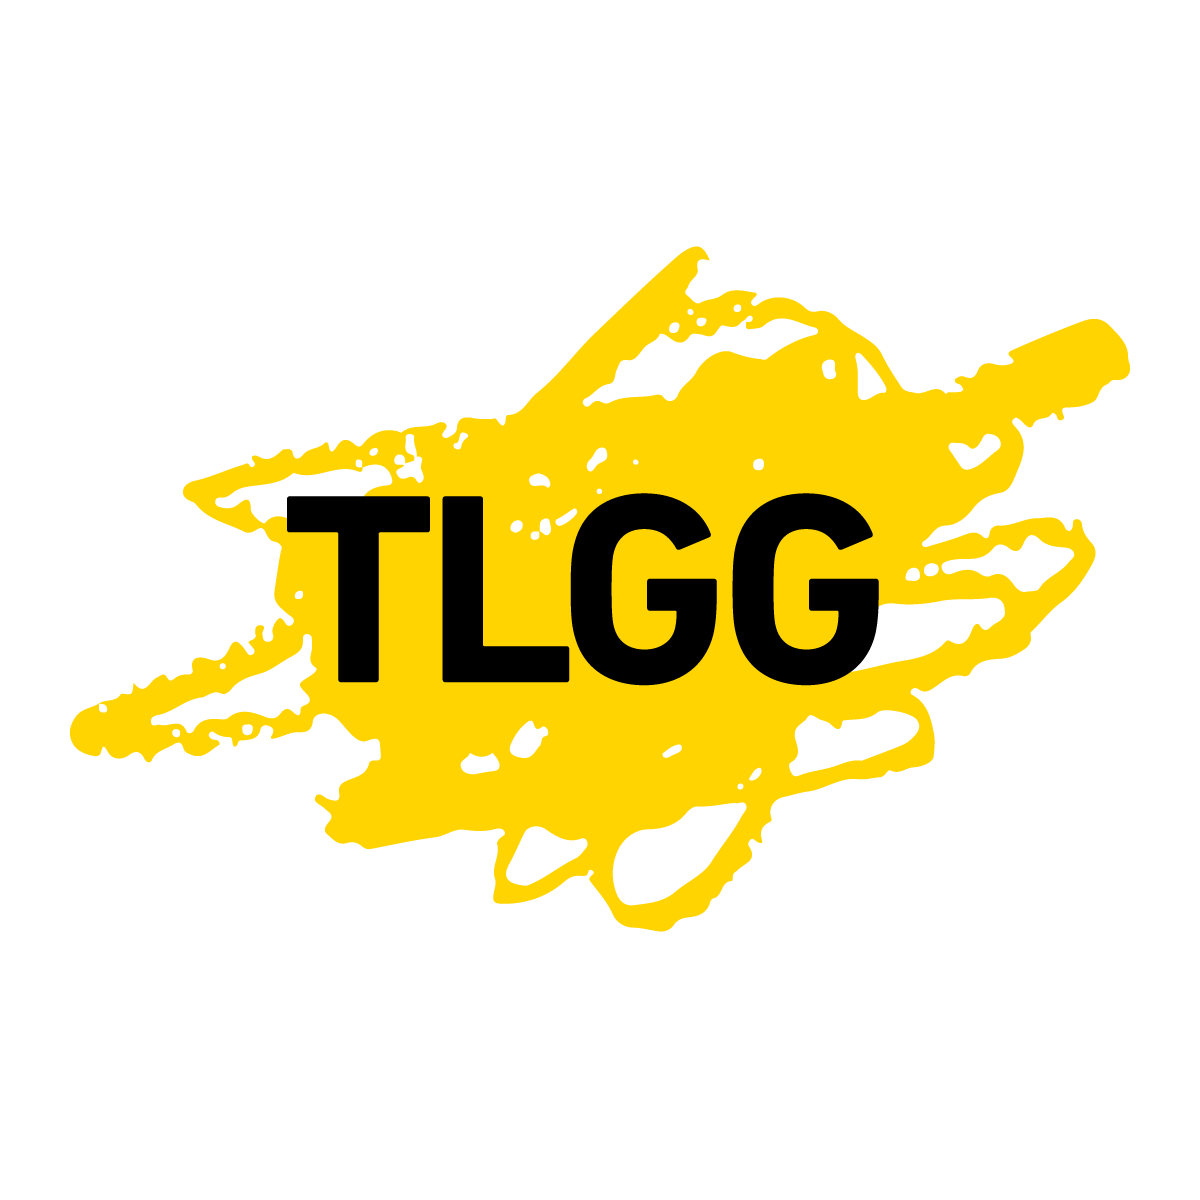 TLGG-Share-Image-1200x1200.png